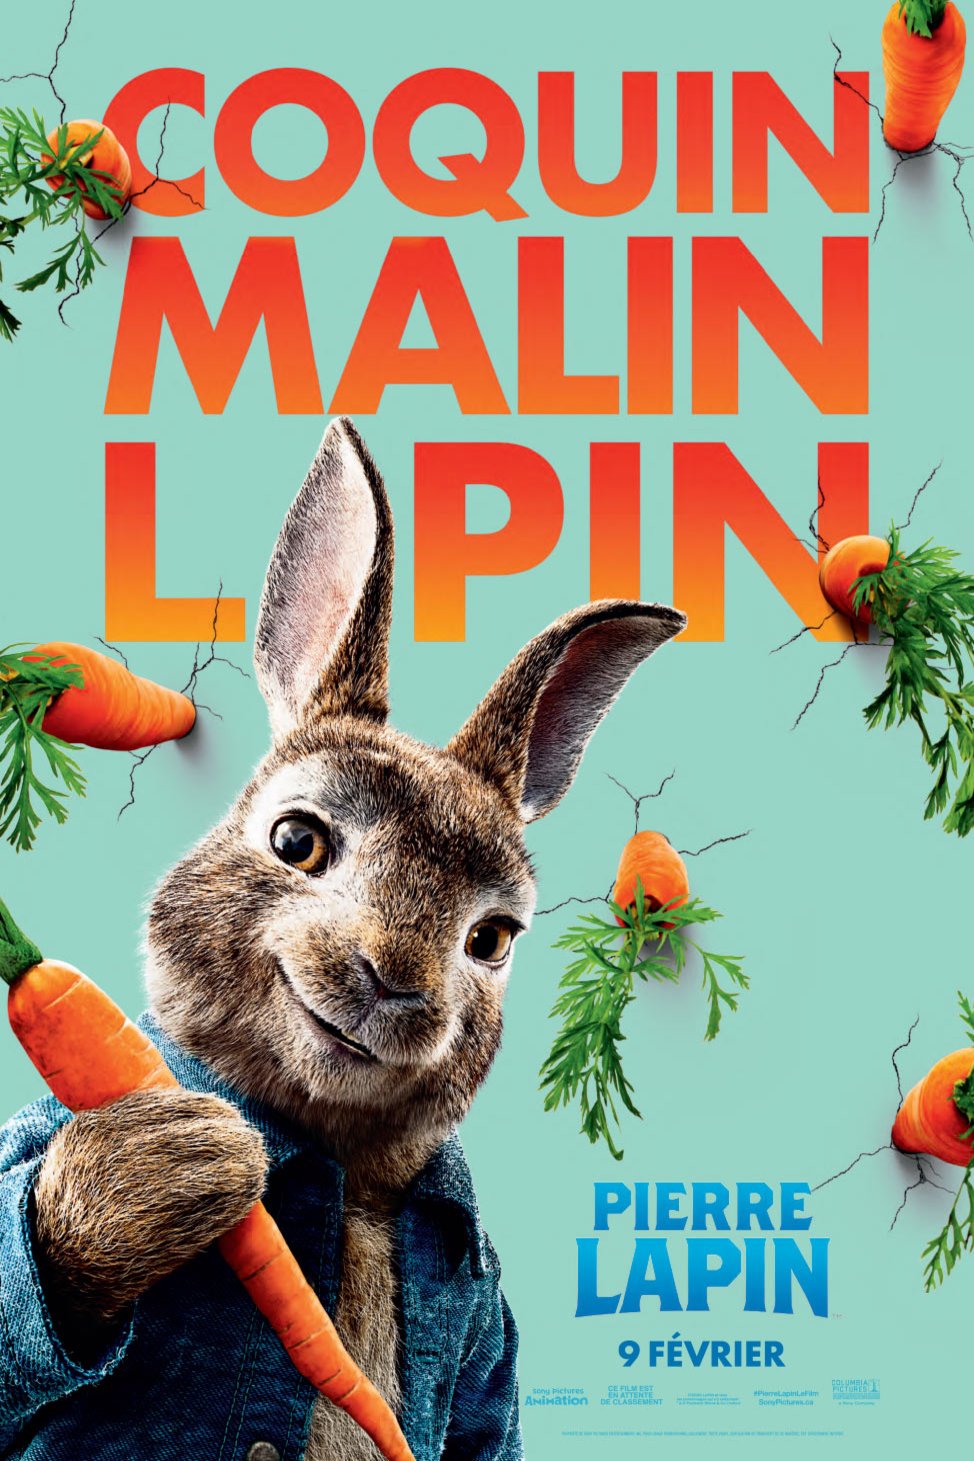 Poster of the movie Pierre Lapin